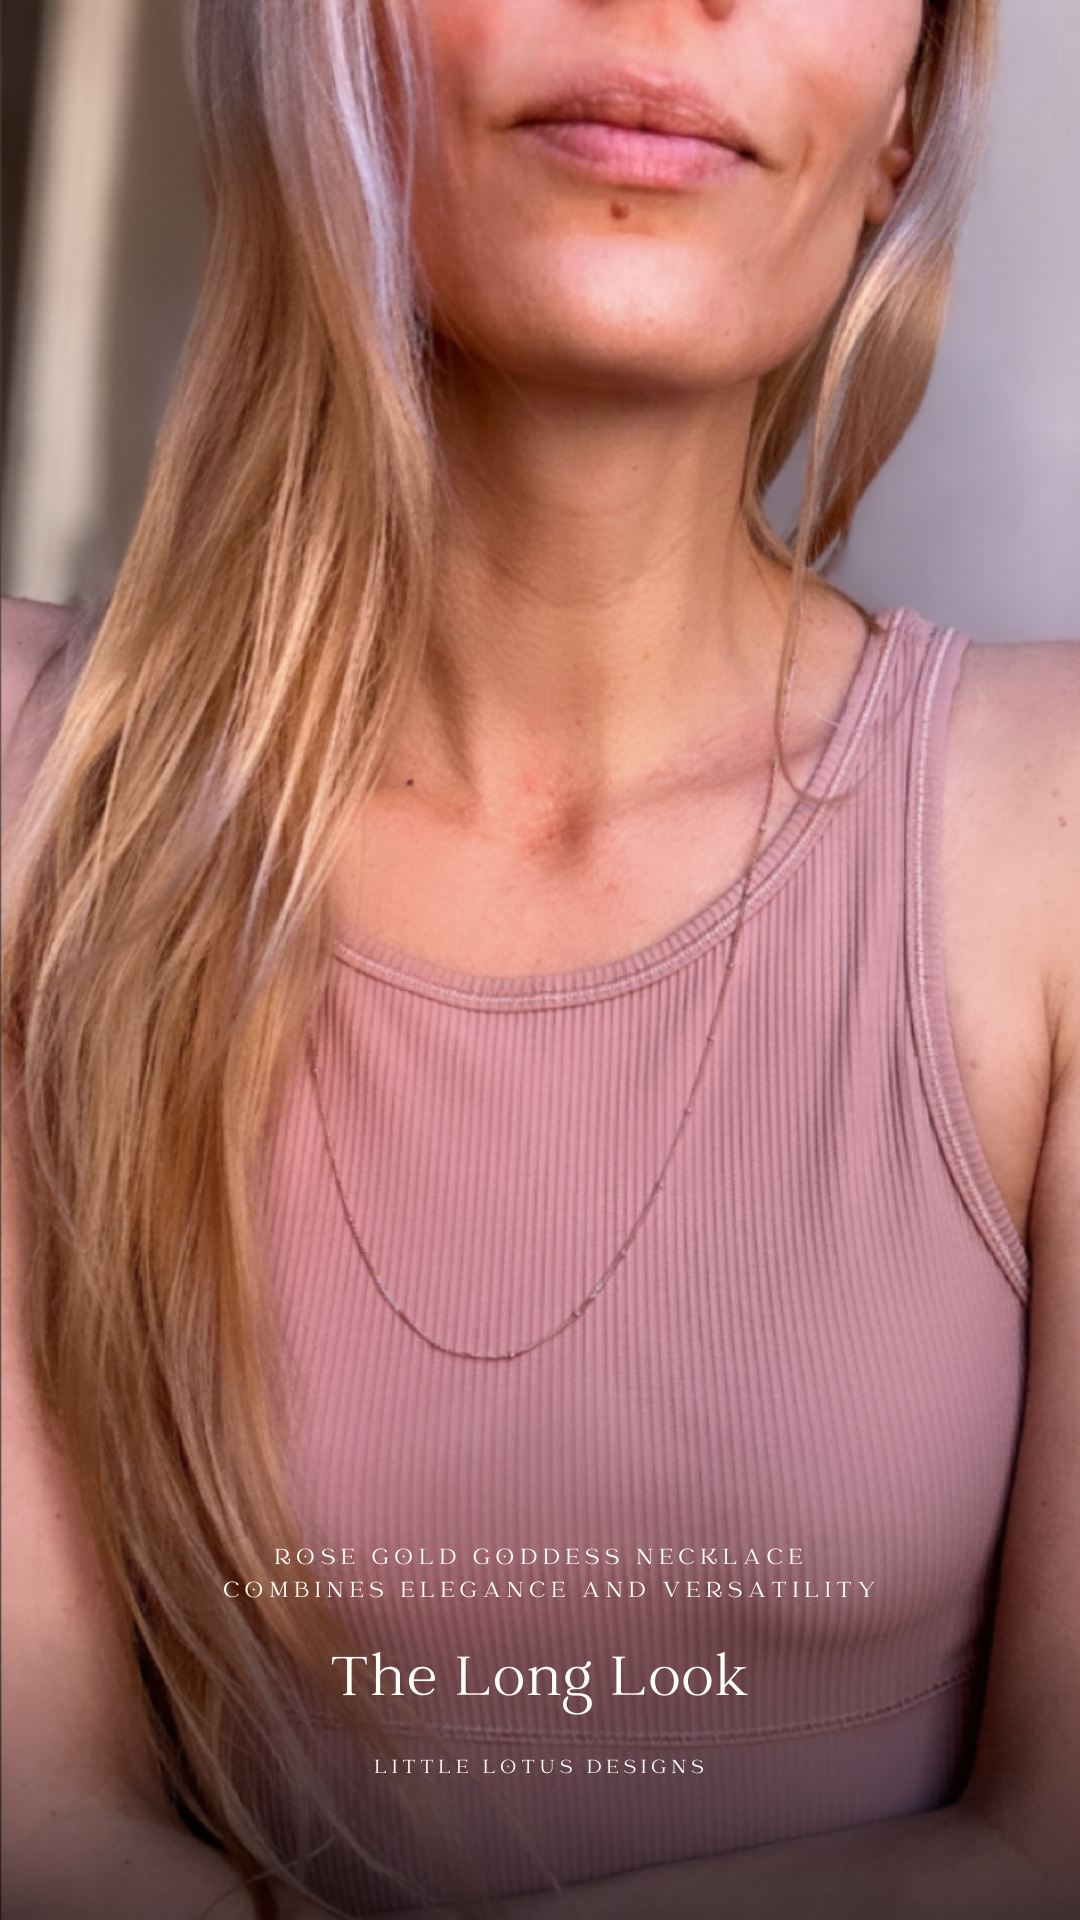 The Rose Gold Goddess Necklace